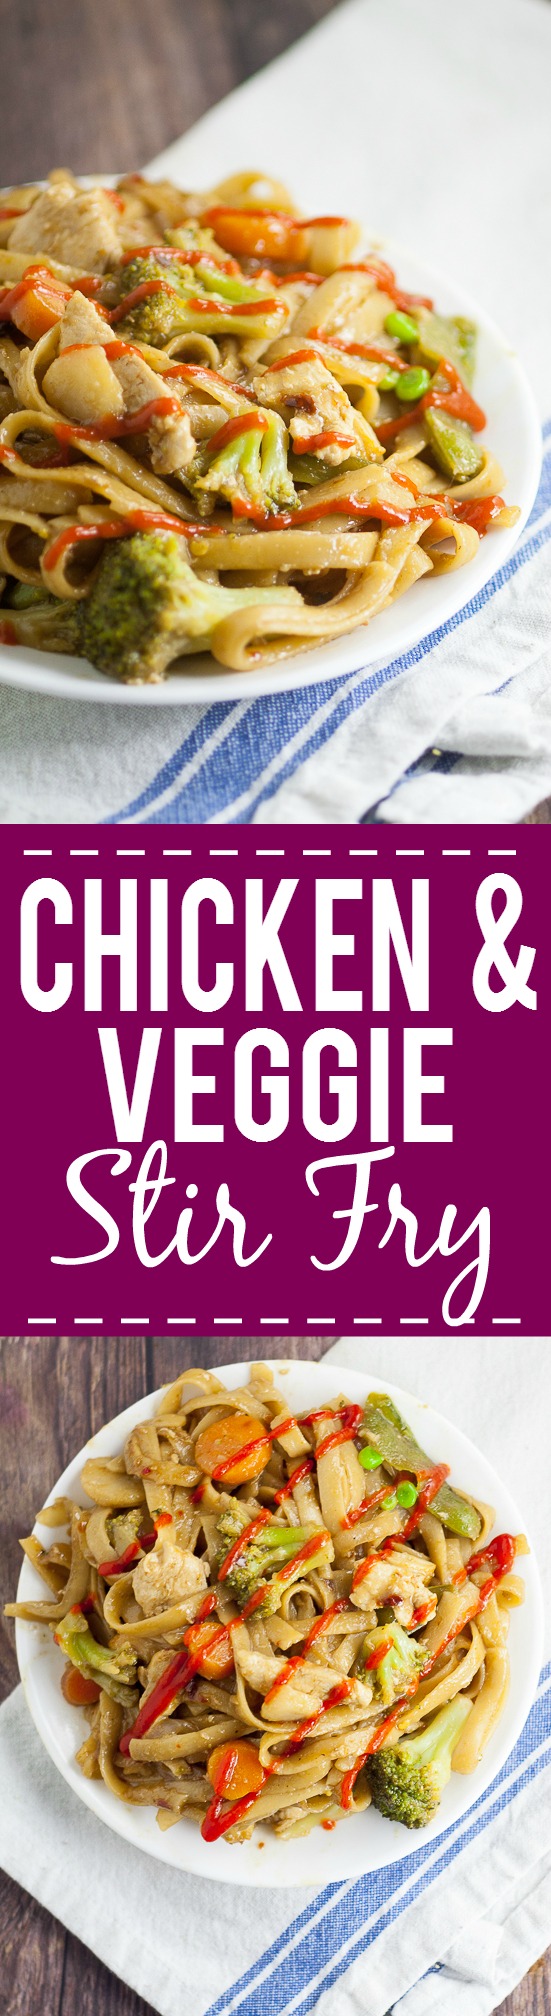 Chicken and Vegetable Stir Fry Recipe - Full of veggies and tangy teriyaki, this Chicken and Vegetable Stir Fry recipe makes a delicious, quick and easy family dinner recipe with chicken breast in just 30 minutes that's healthy too!